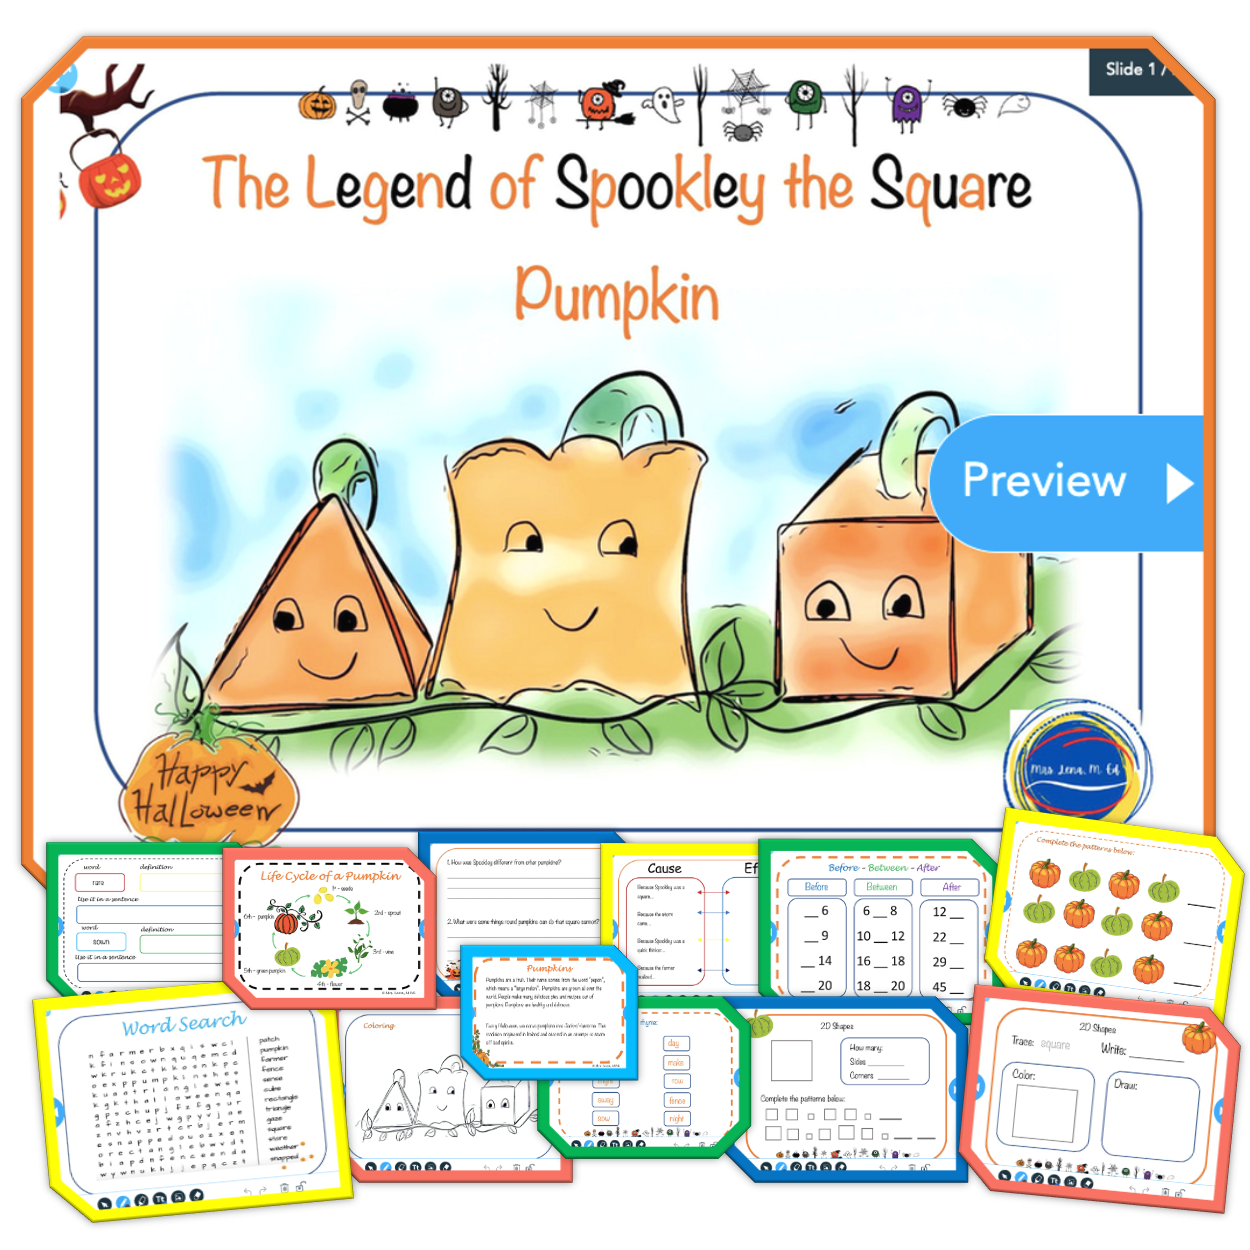 The Legend of Spookley the Square Pumpkin by Troiano Lesson Plan; Halloween lesson plans; Fall lesson plans: #thelegendofspookleythesquare

